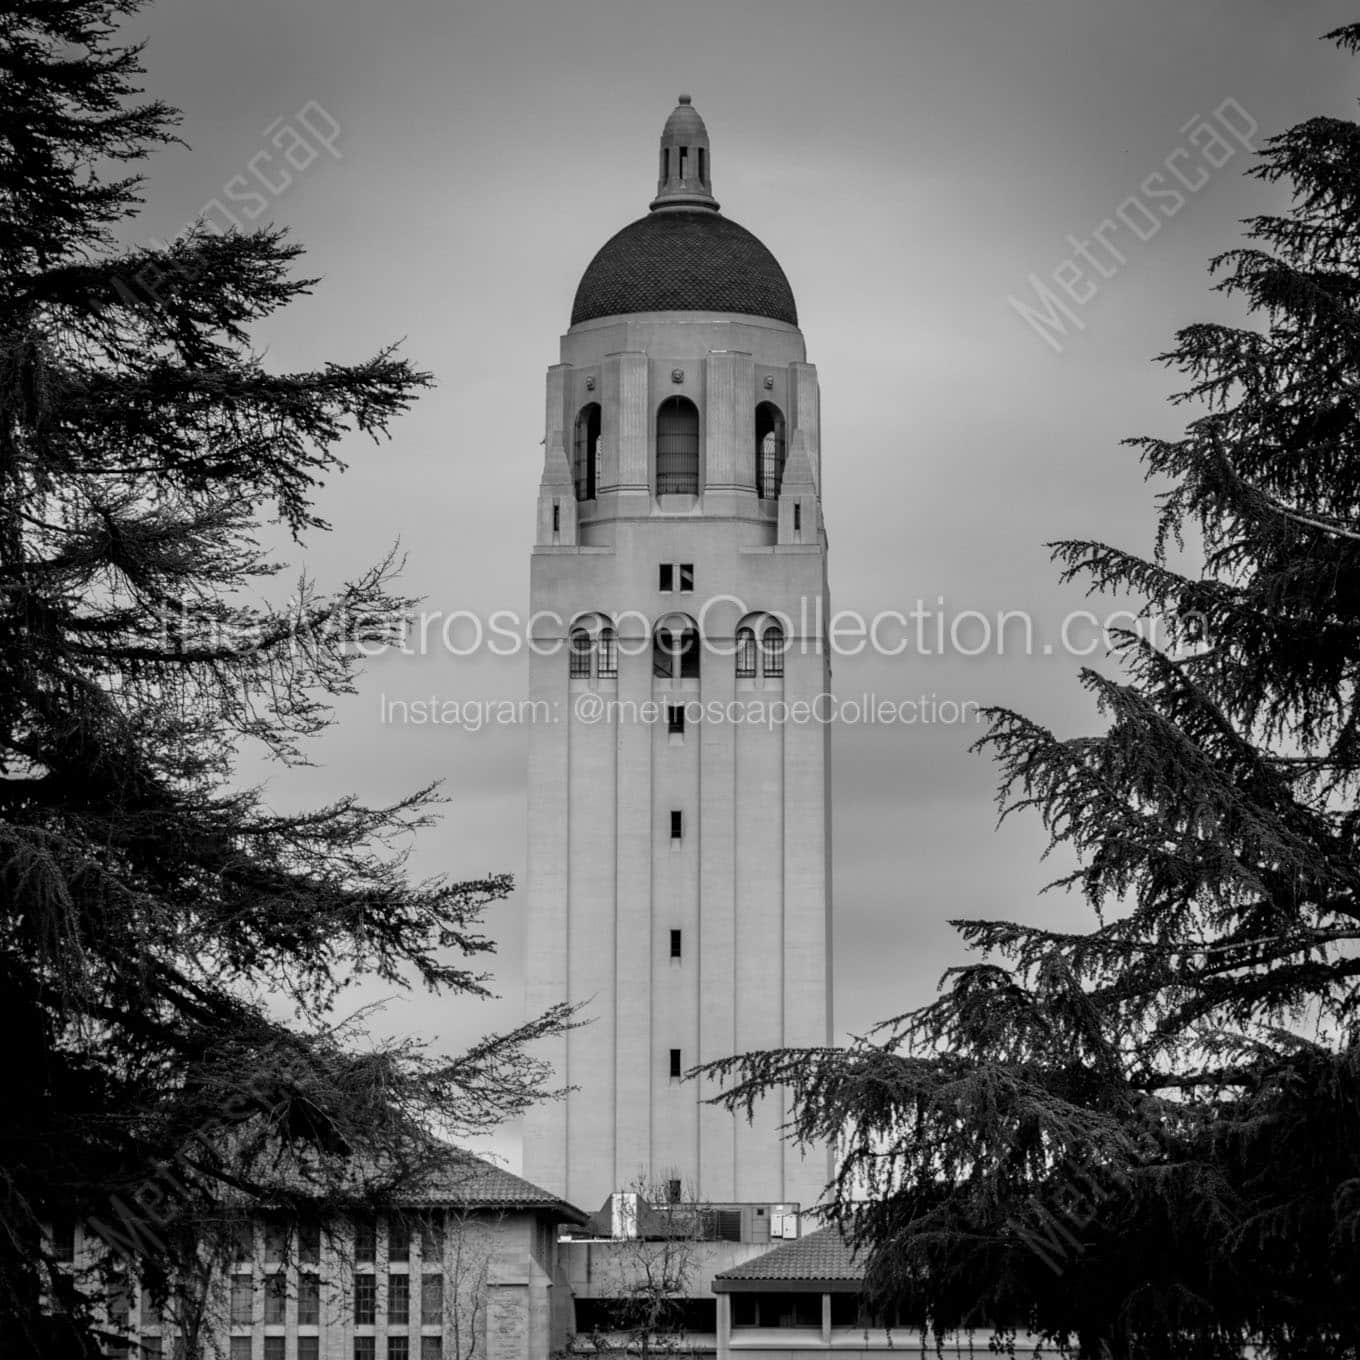 hoover tower stanford campus Black & White Wall Art